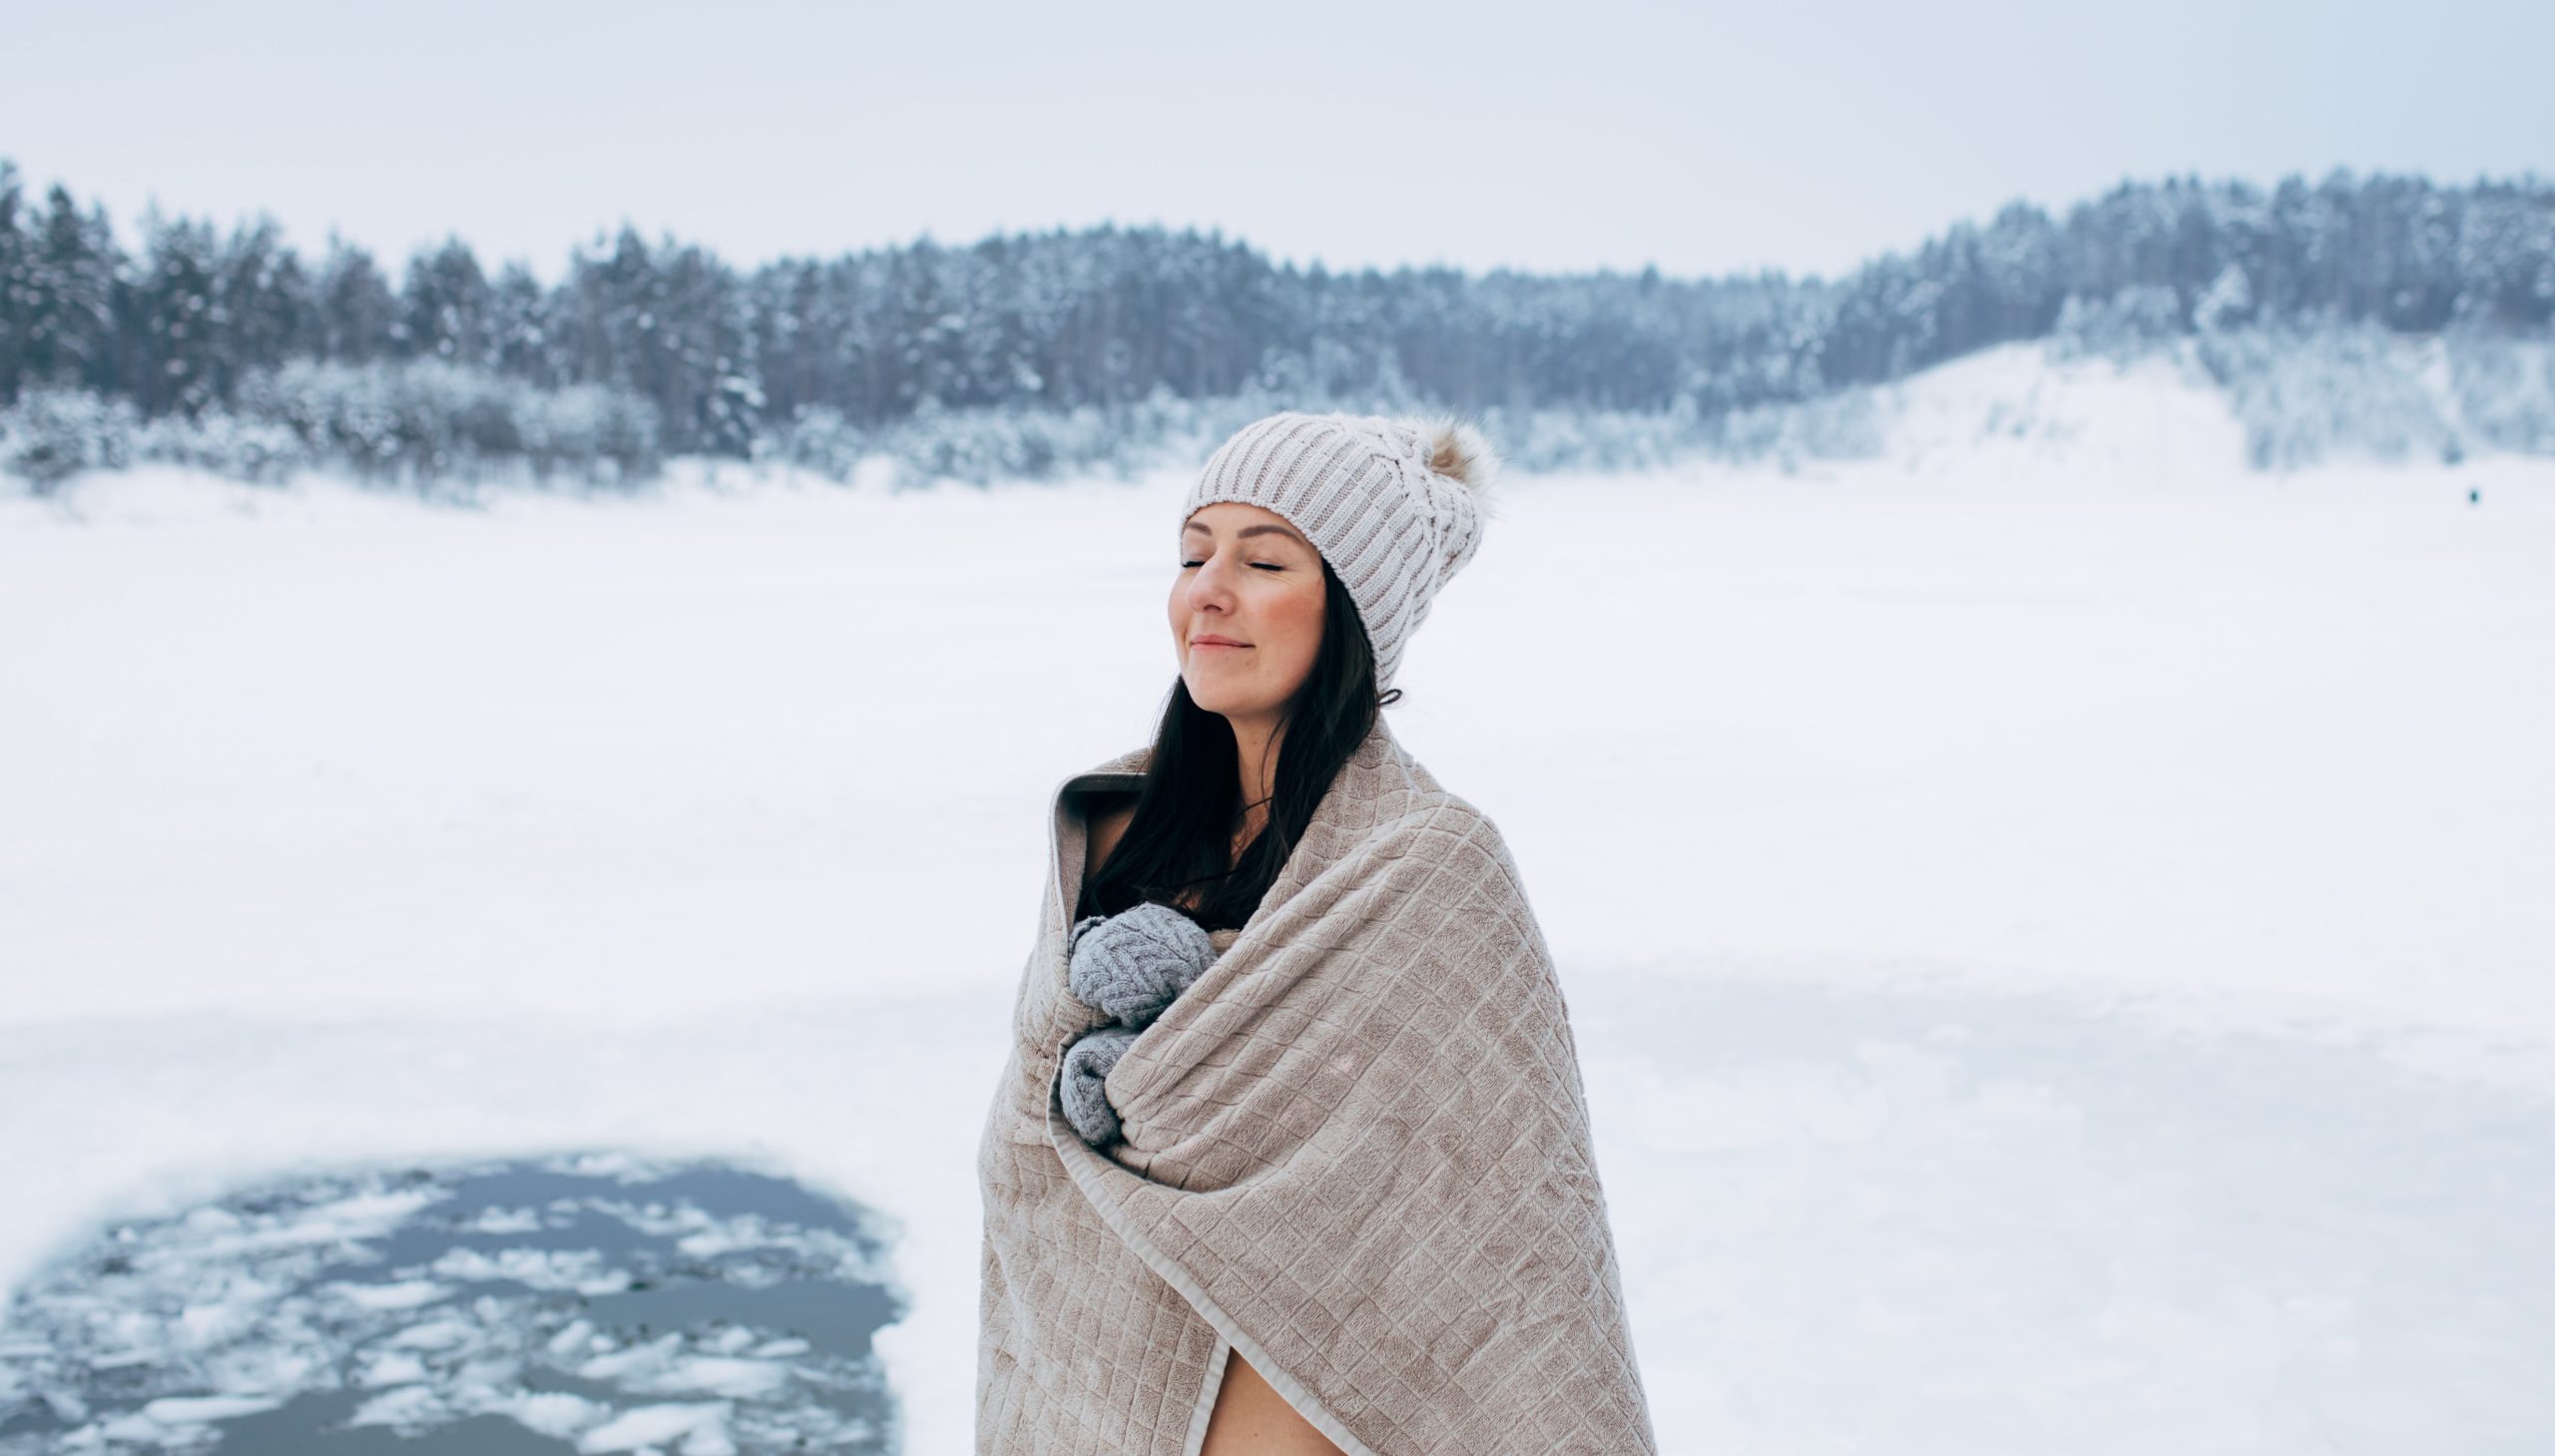 winter,lake,cold,water,chilly,warm,women